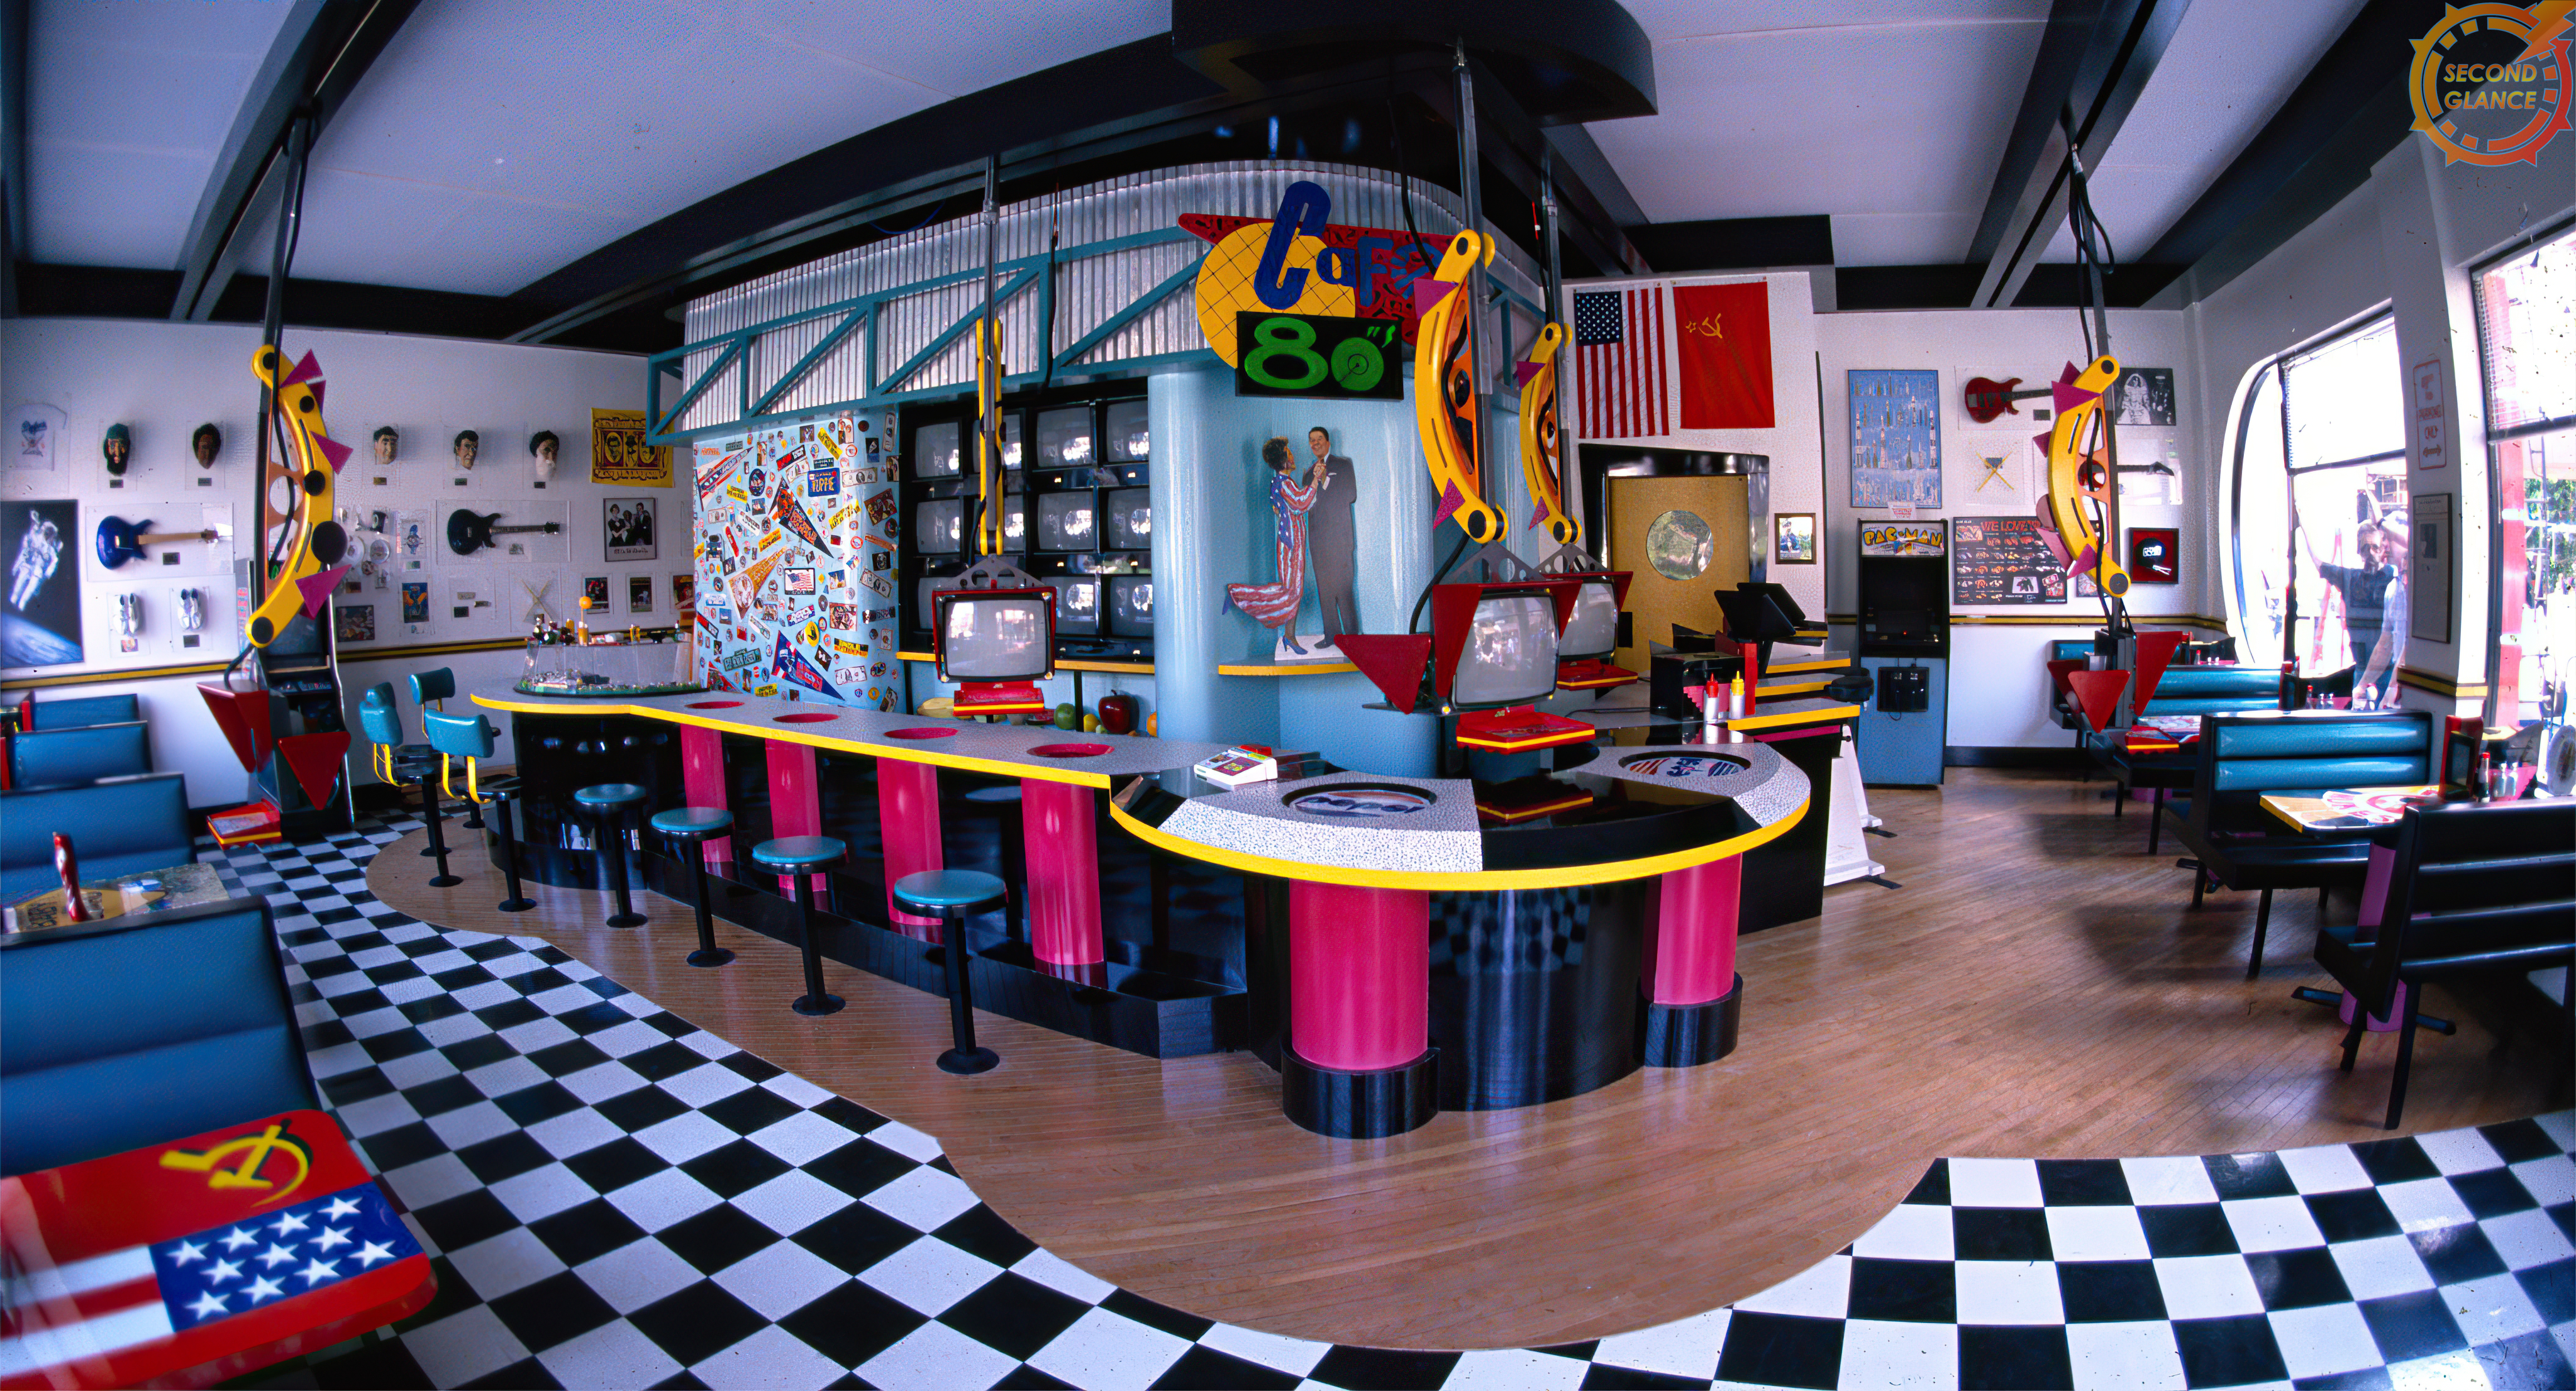 The Cafe 80s by SecondGlanceHD on DeviantArt